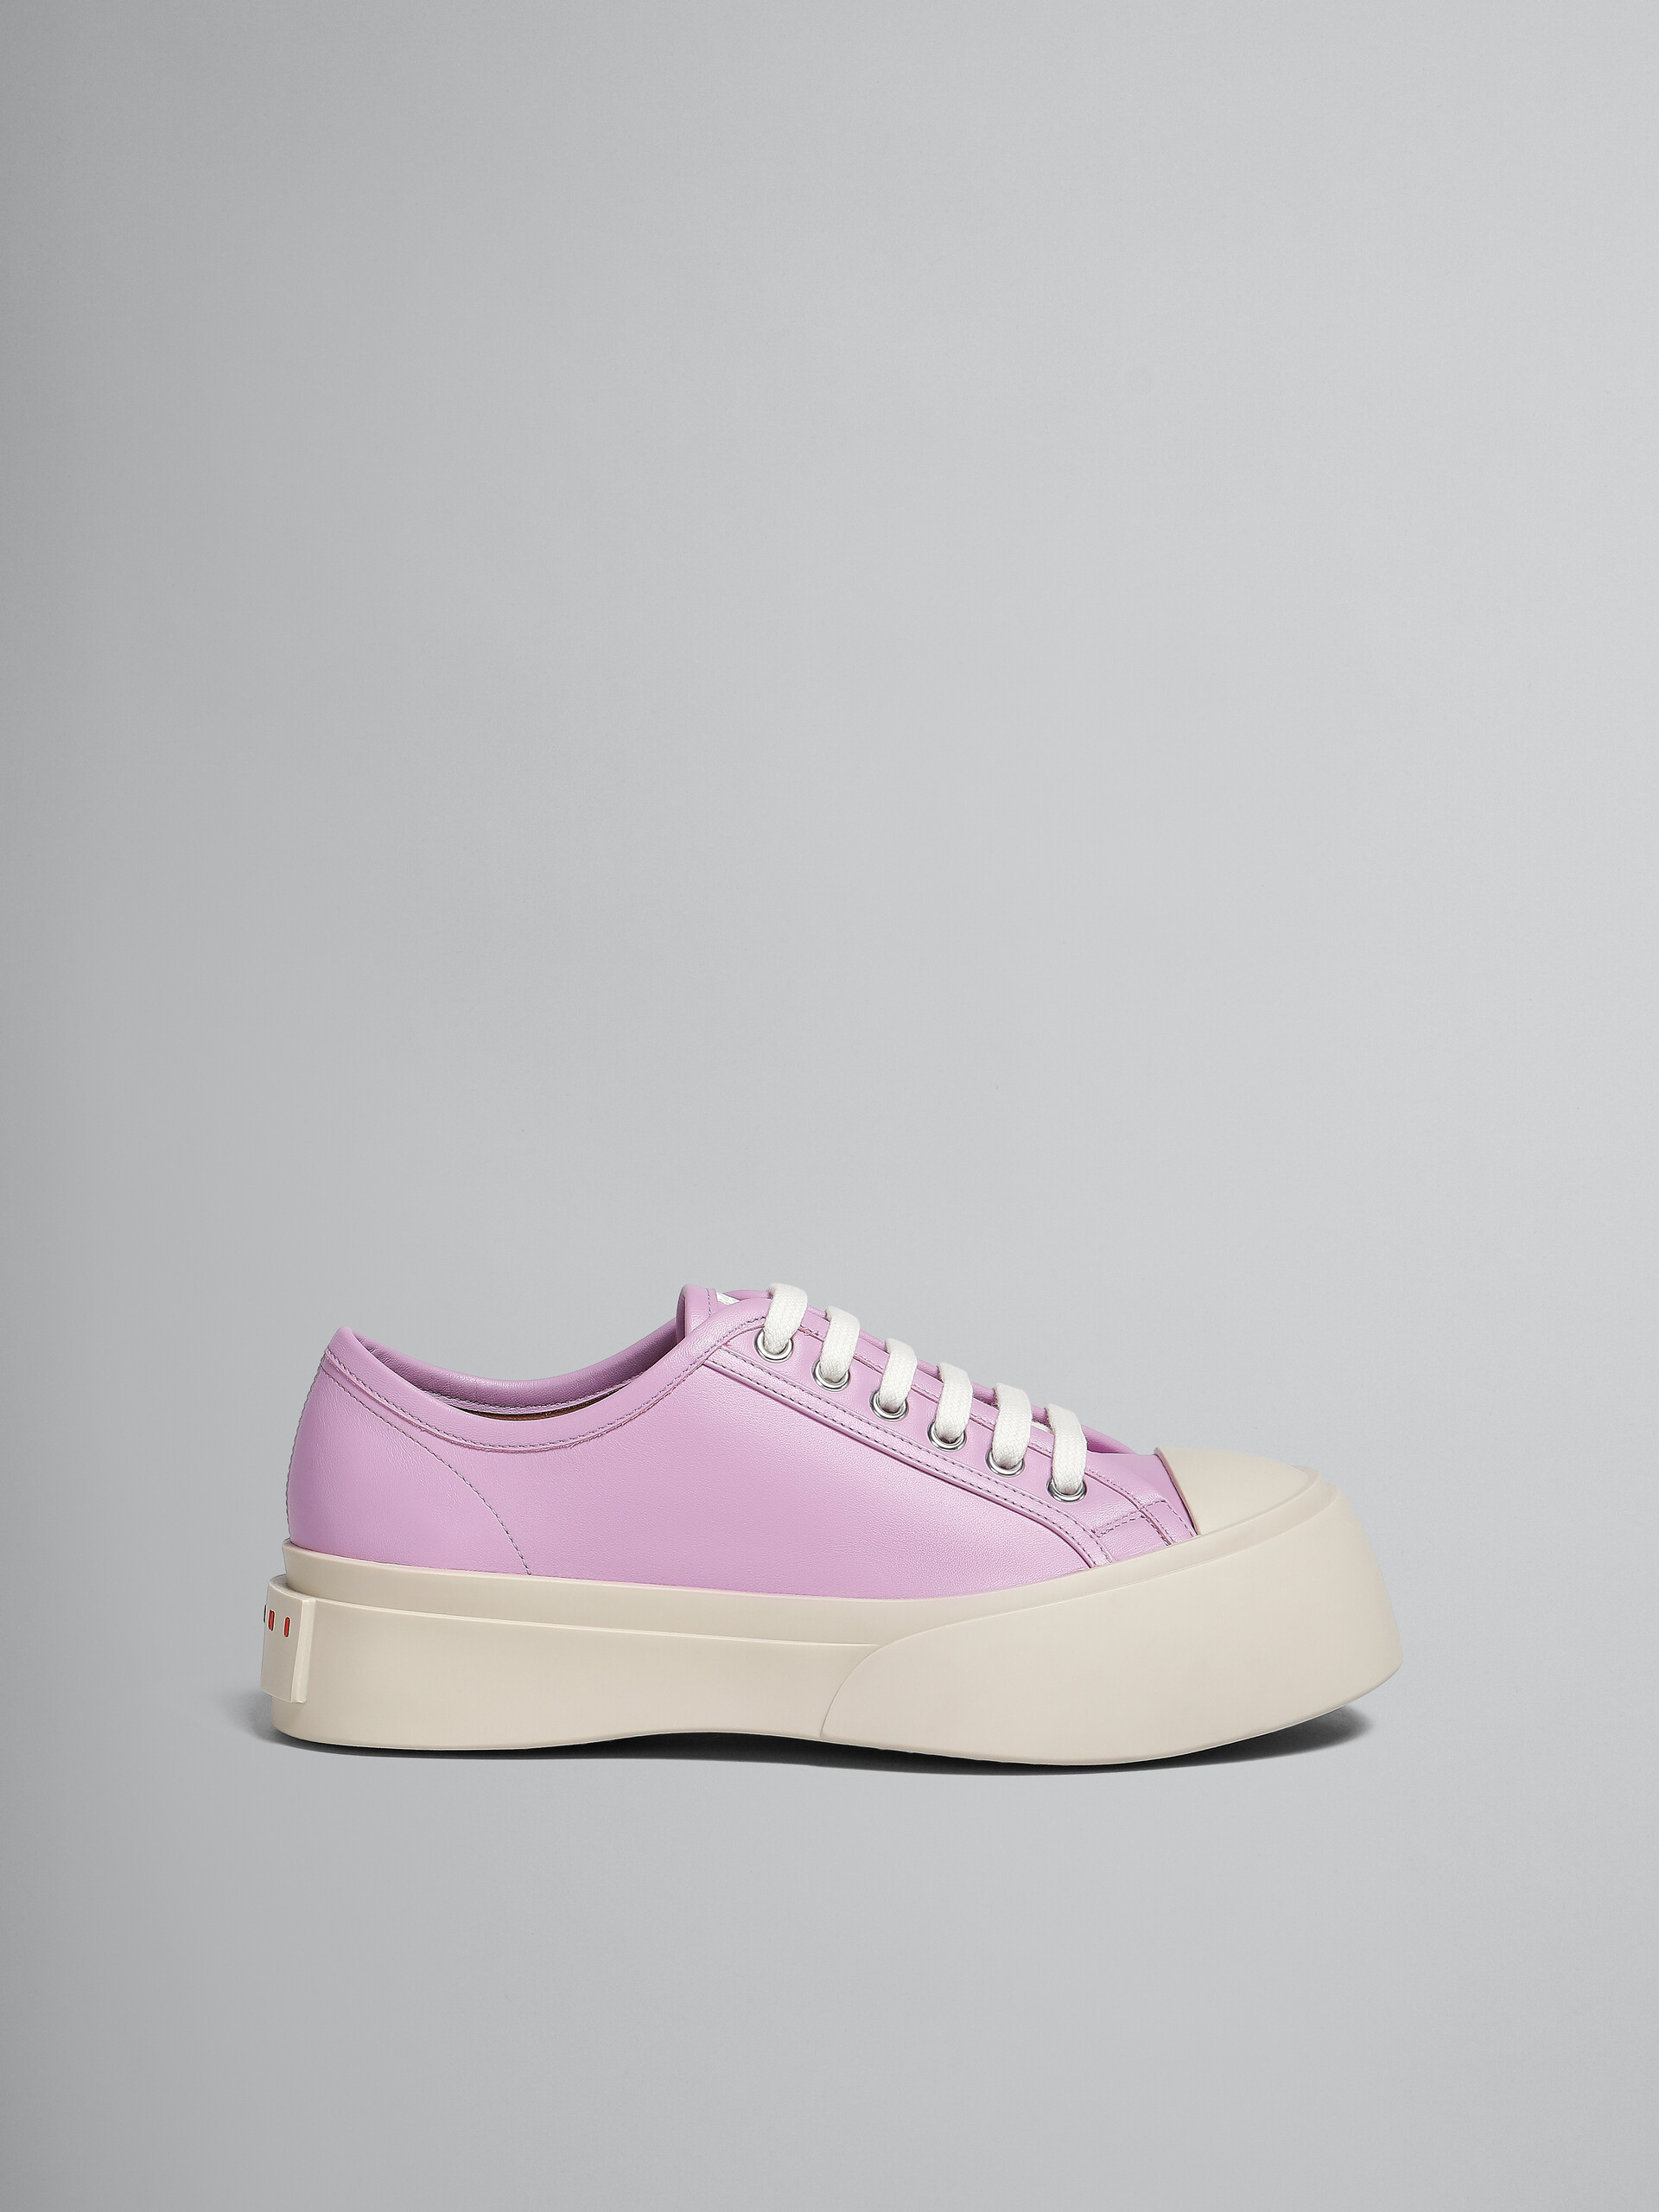 Lilac nappa leather Pablo lace-up sneaker - Sneakers - Image 1